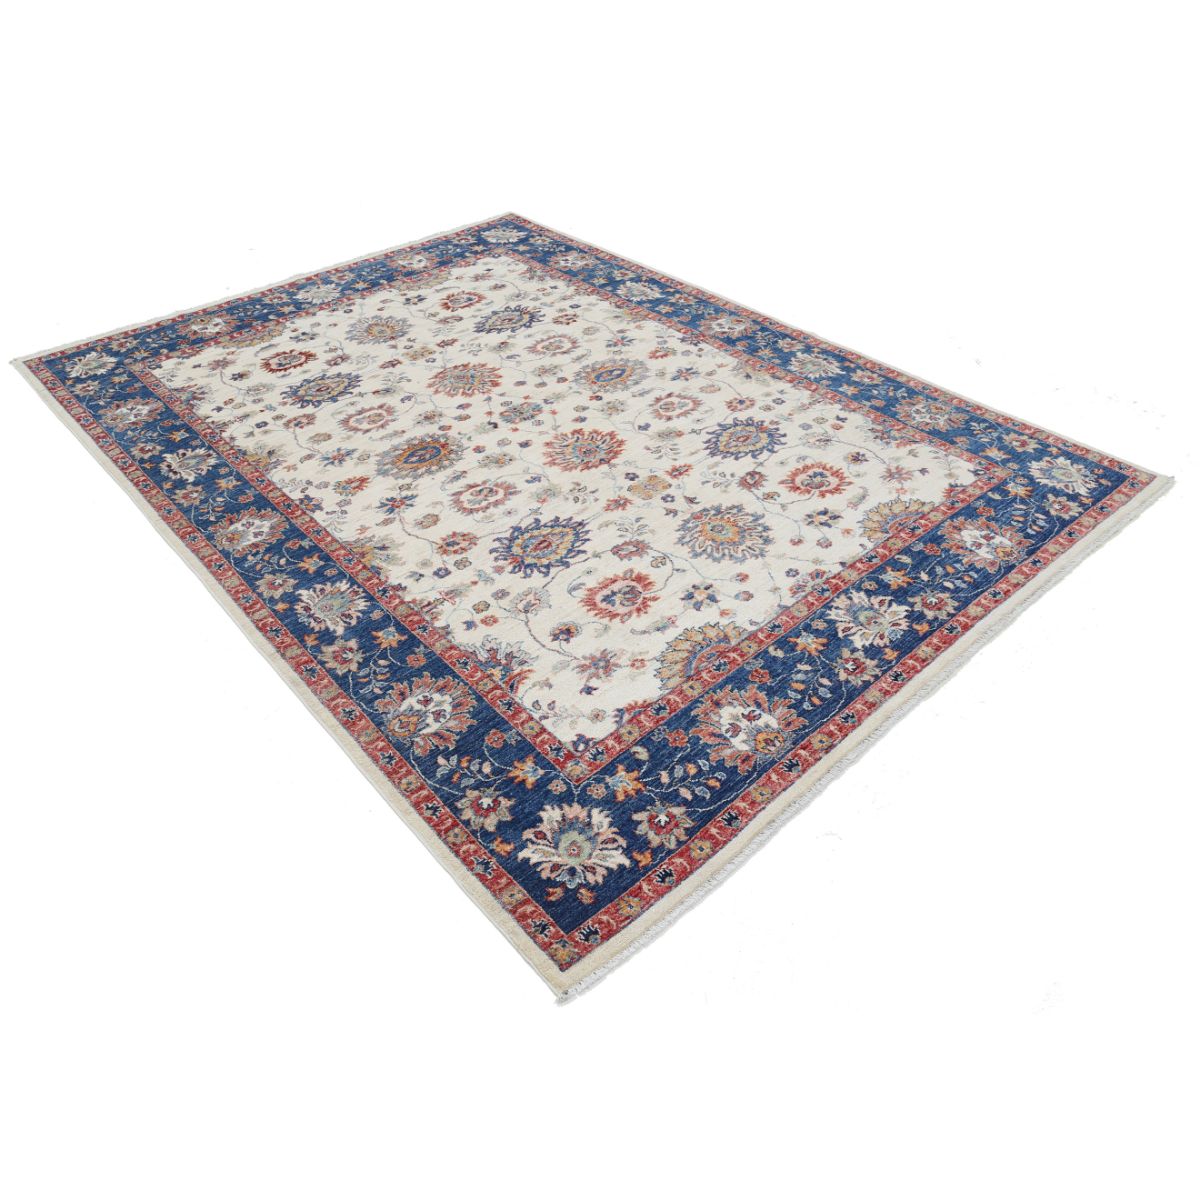 Ziegler 6'7" X 8'11" Wool Hand-Knotted Rug